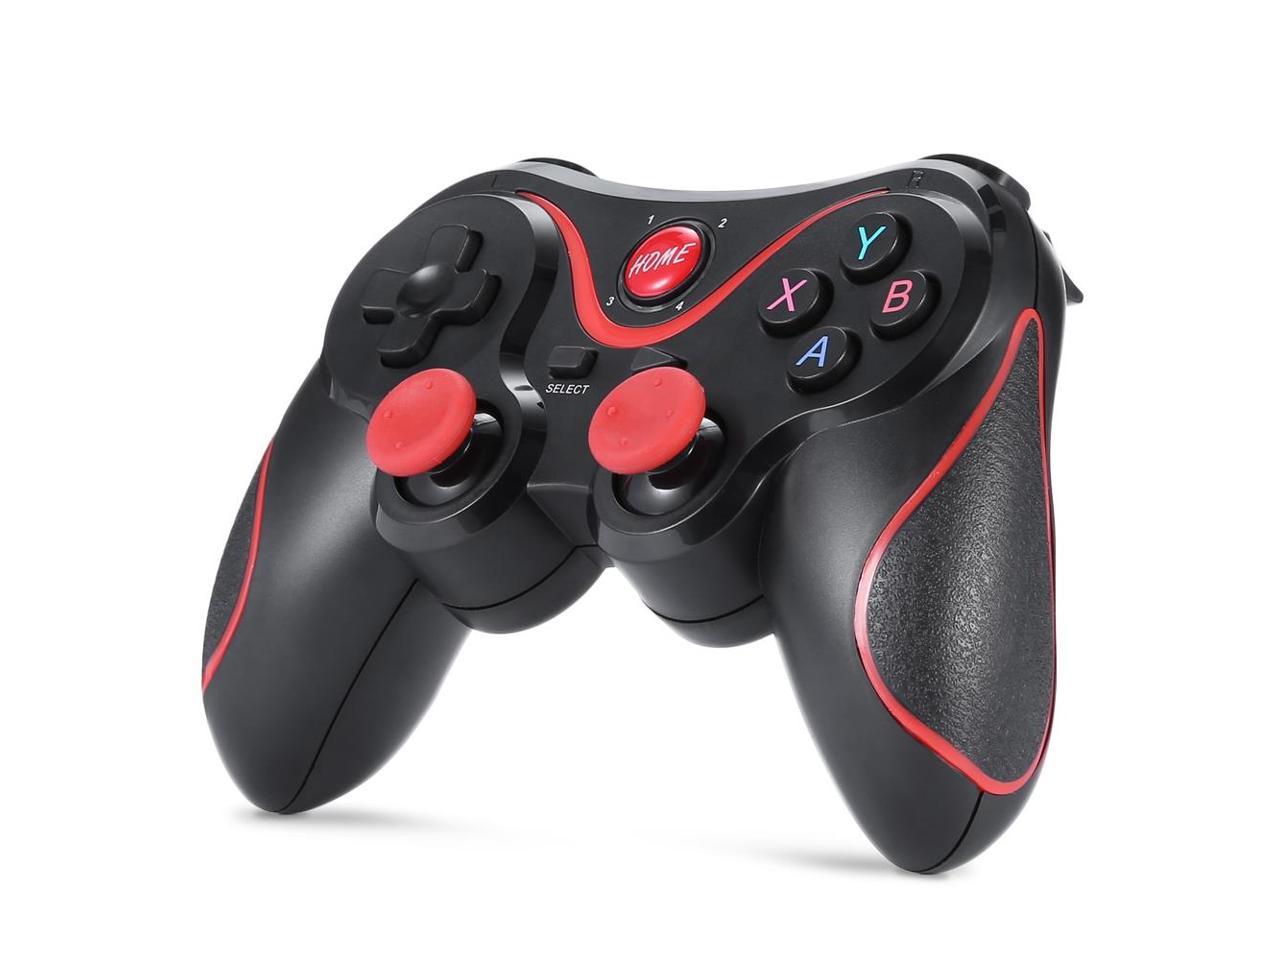 Controller GEN GAME X3 Wireless Bluetooth Joystick with Wireless Receiver for iOS/ Android Smartphone/ Tablet/ Smart TV/ TV Windows PC - Newegg.com